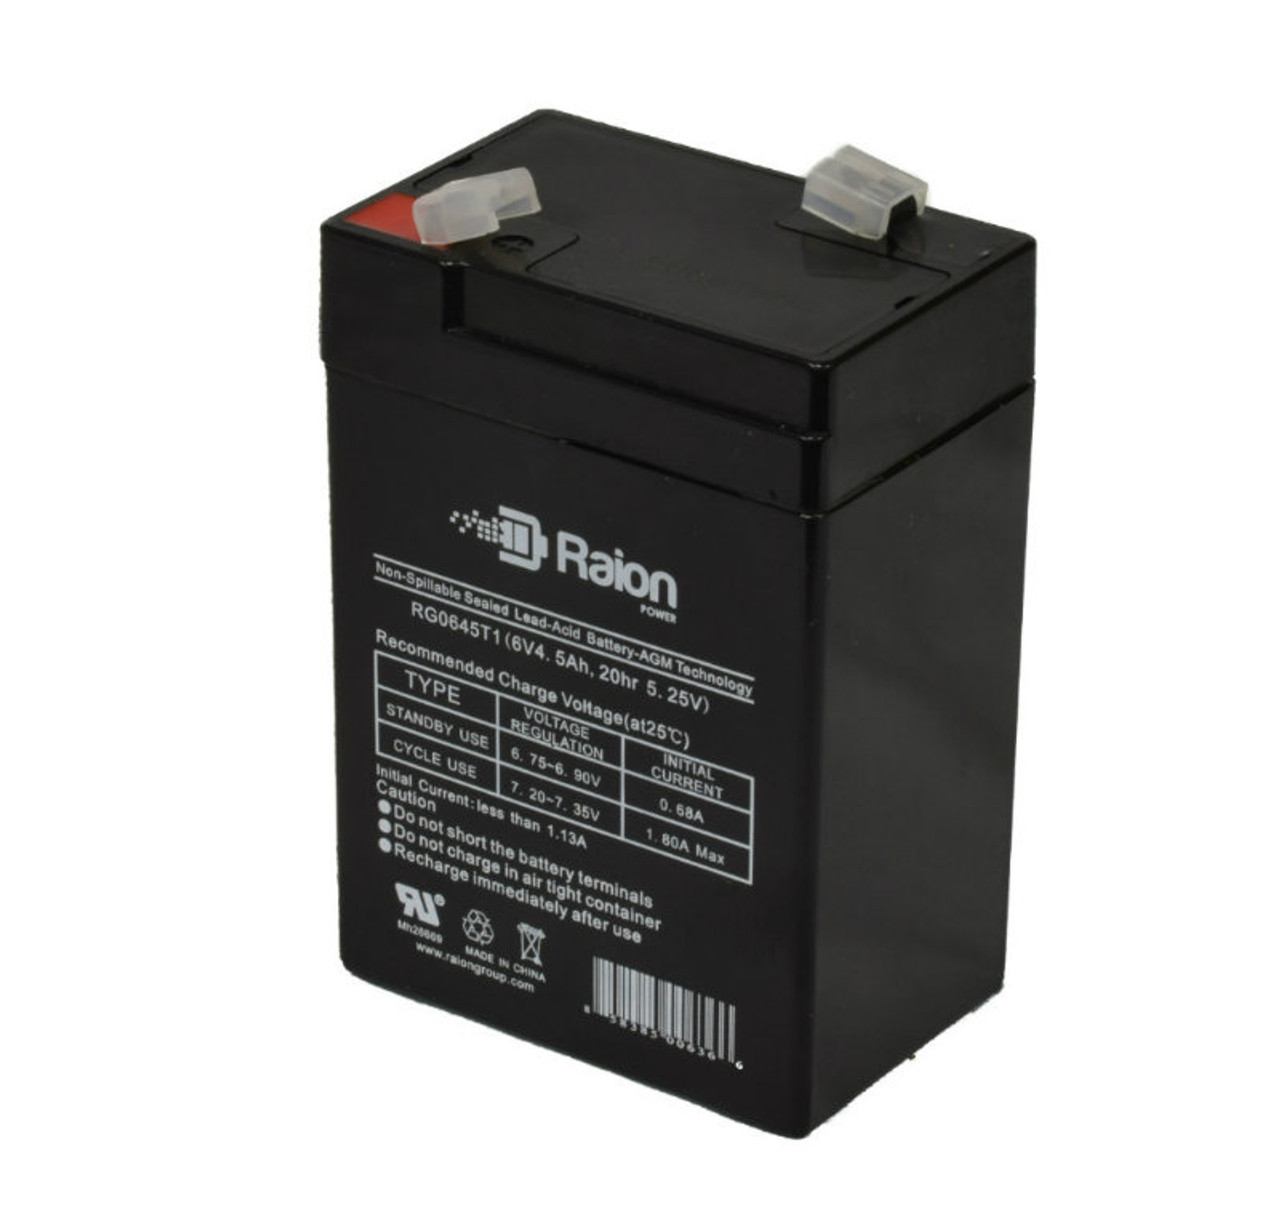 Raion Power RG0645T1 6V 4.5Ah Replacement Battery Cartridge for Light Alarms XE9